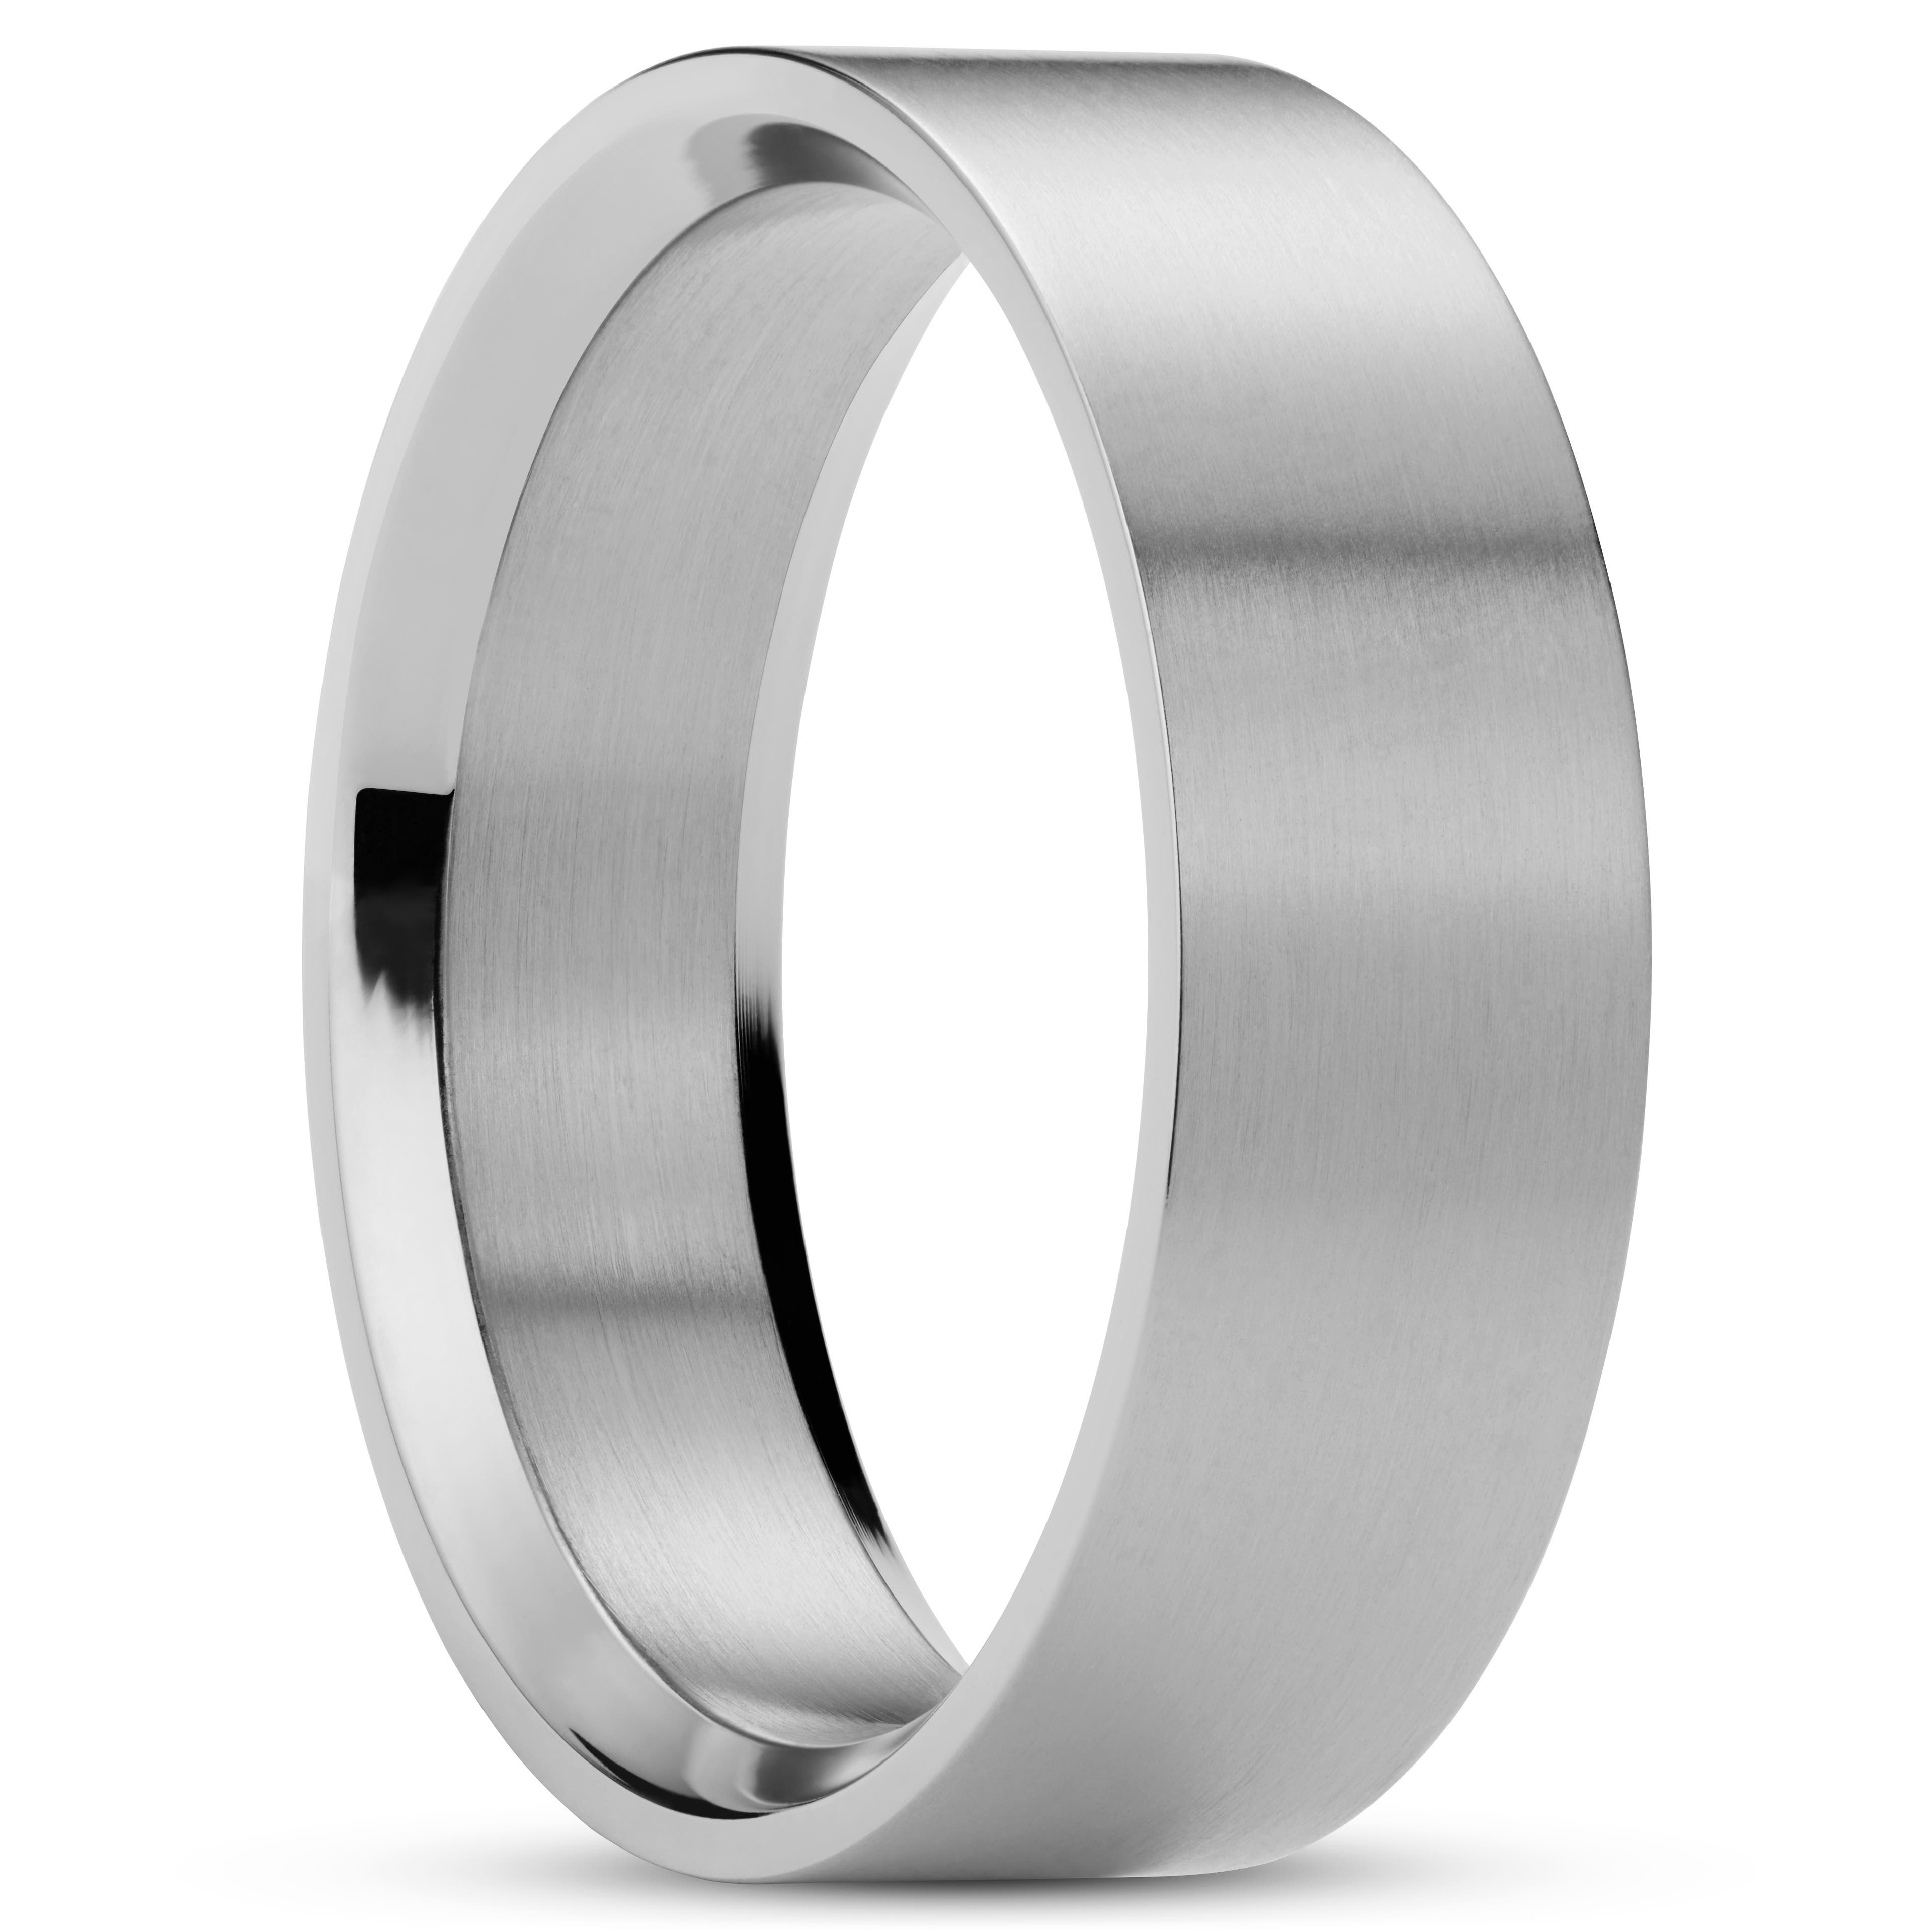 7 mm Matte Silver-Tone Stainless Steel Ring